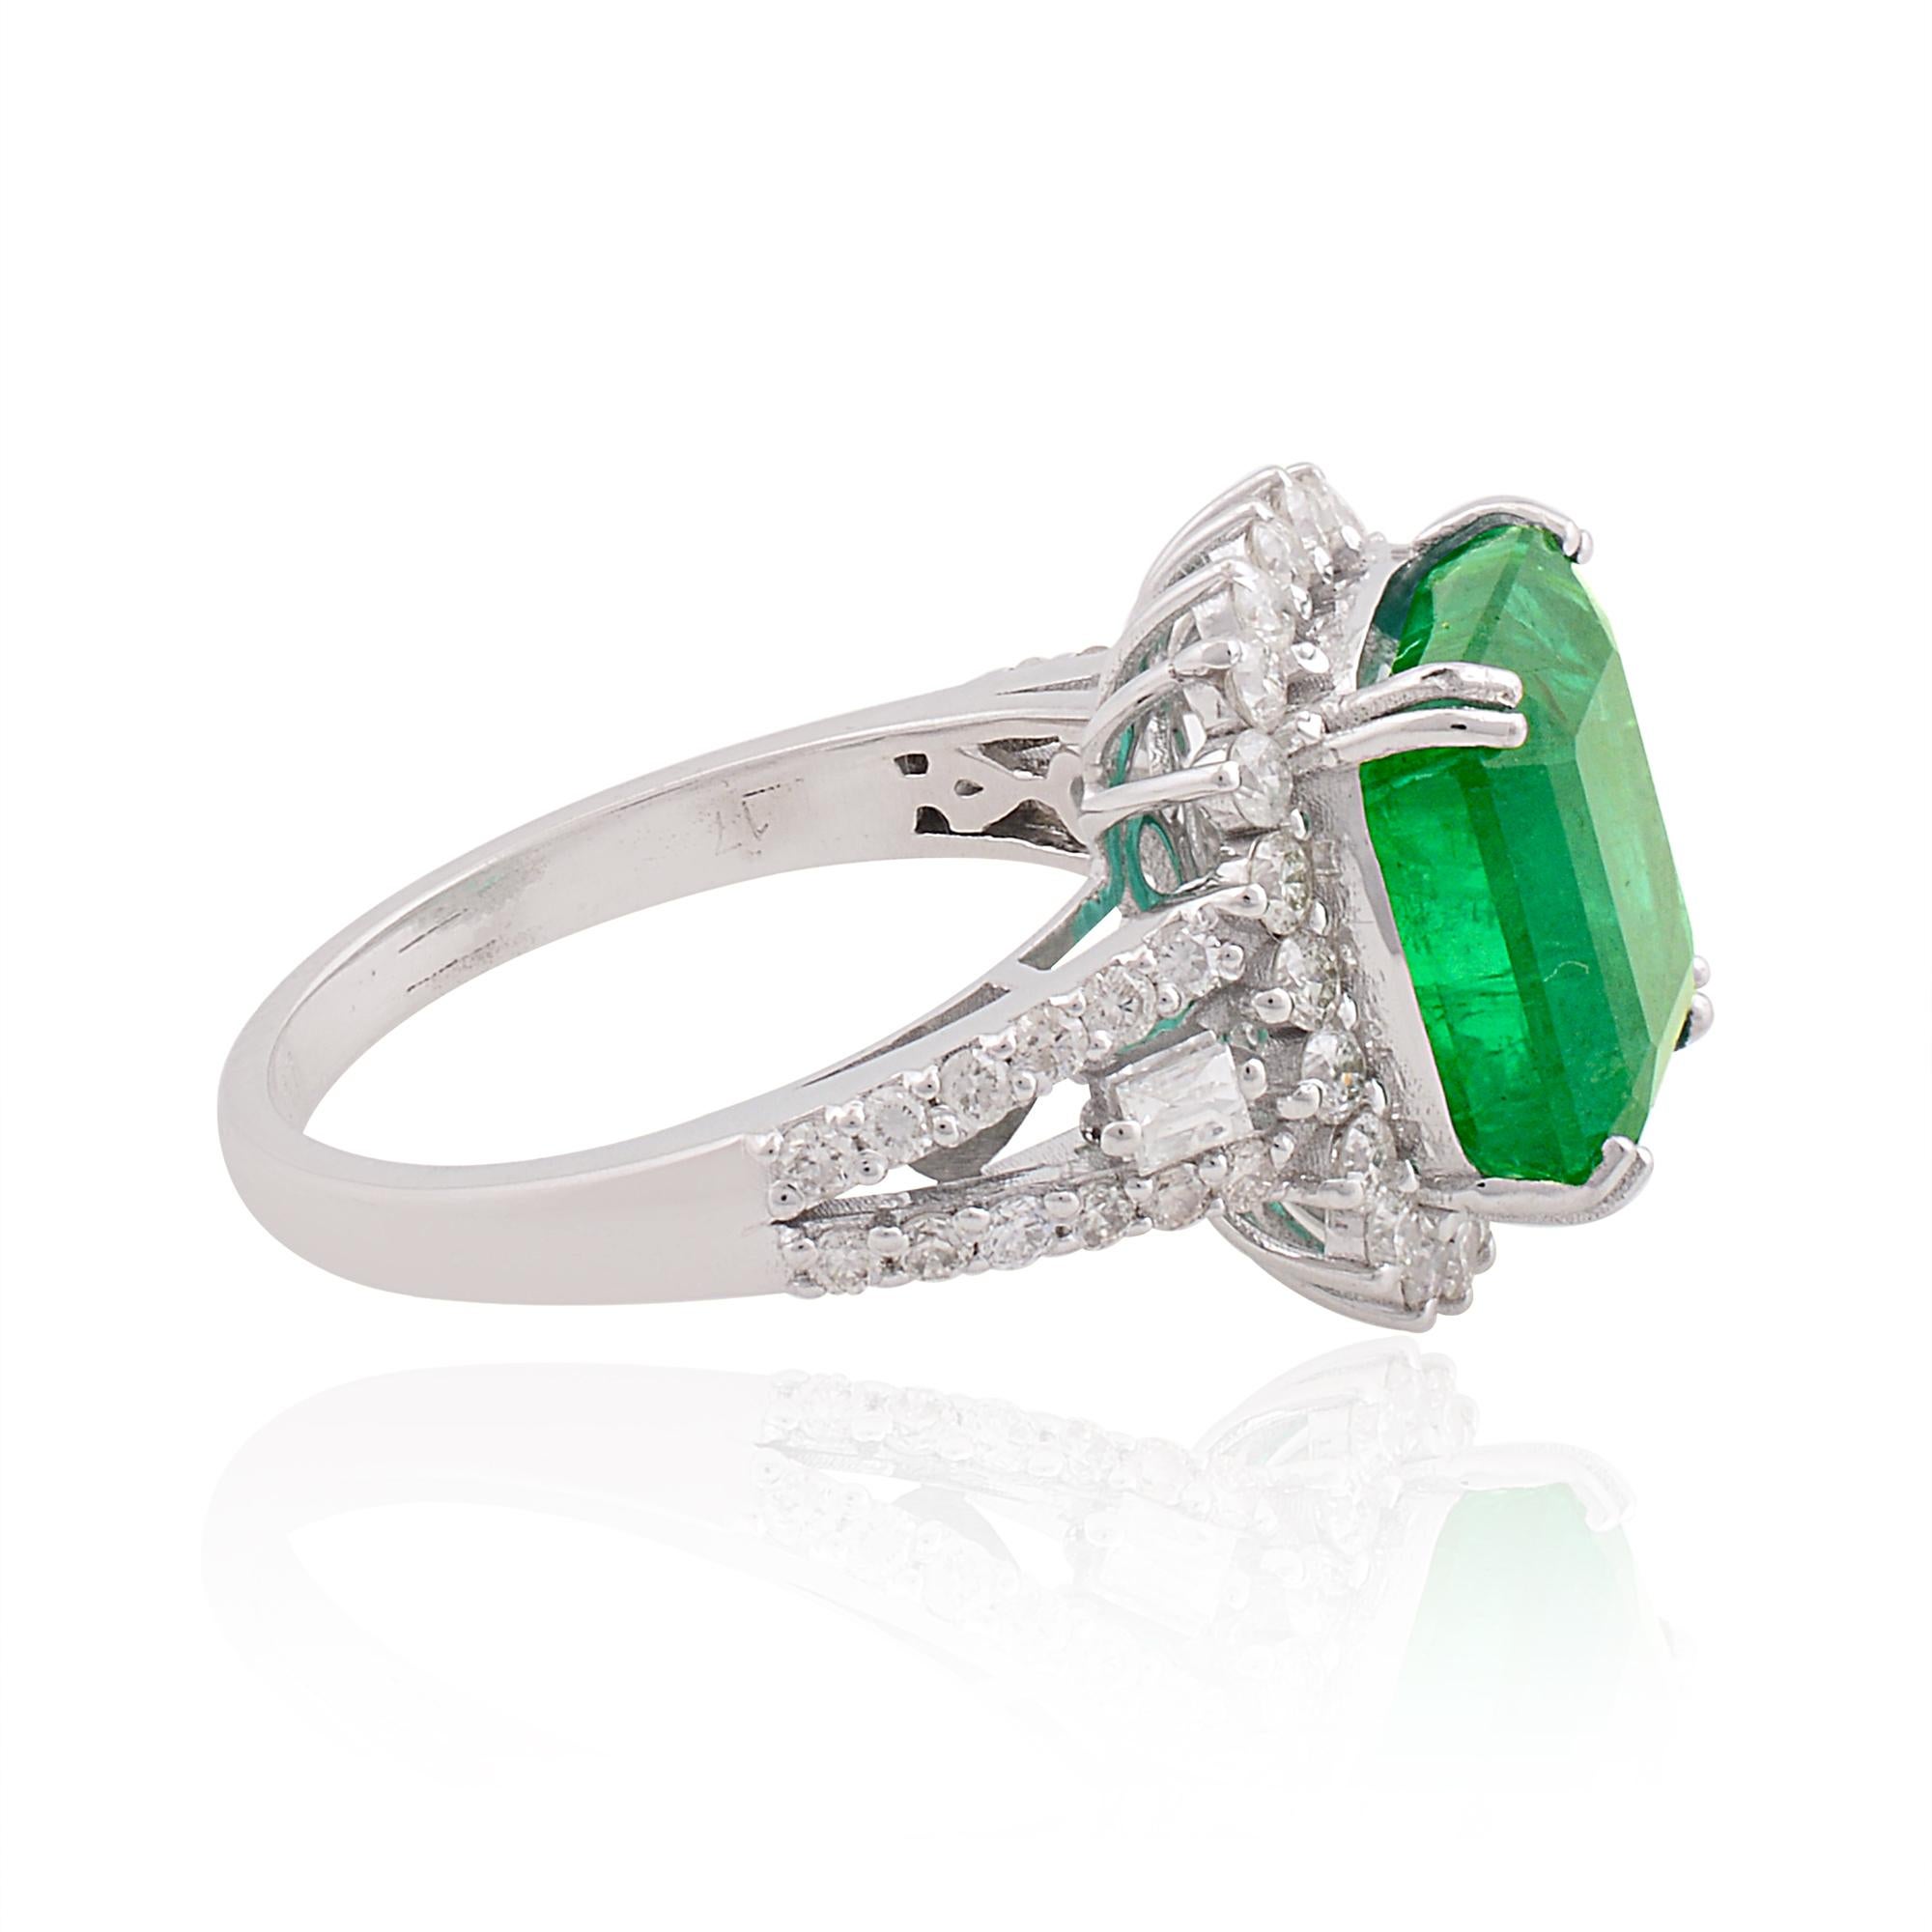 Crafted with precision and attention to detail, our Natural Emerald Gemstone Cocktail Ring exemplifies the highest standards of fine jewelry craftsmanship. Each element is thoughtfully designed to create a piece that is as beautiful as it is